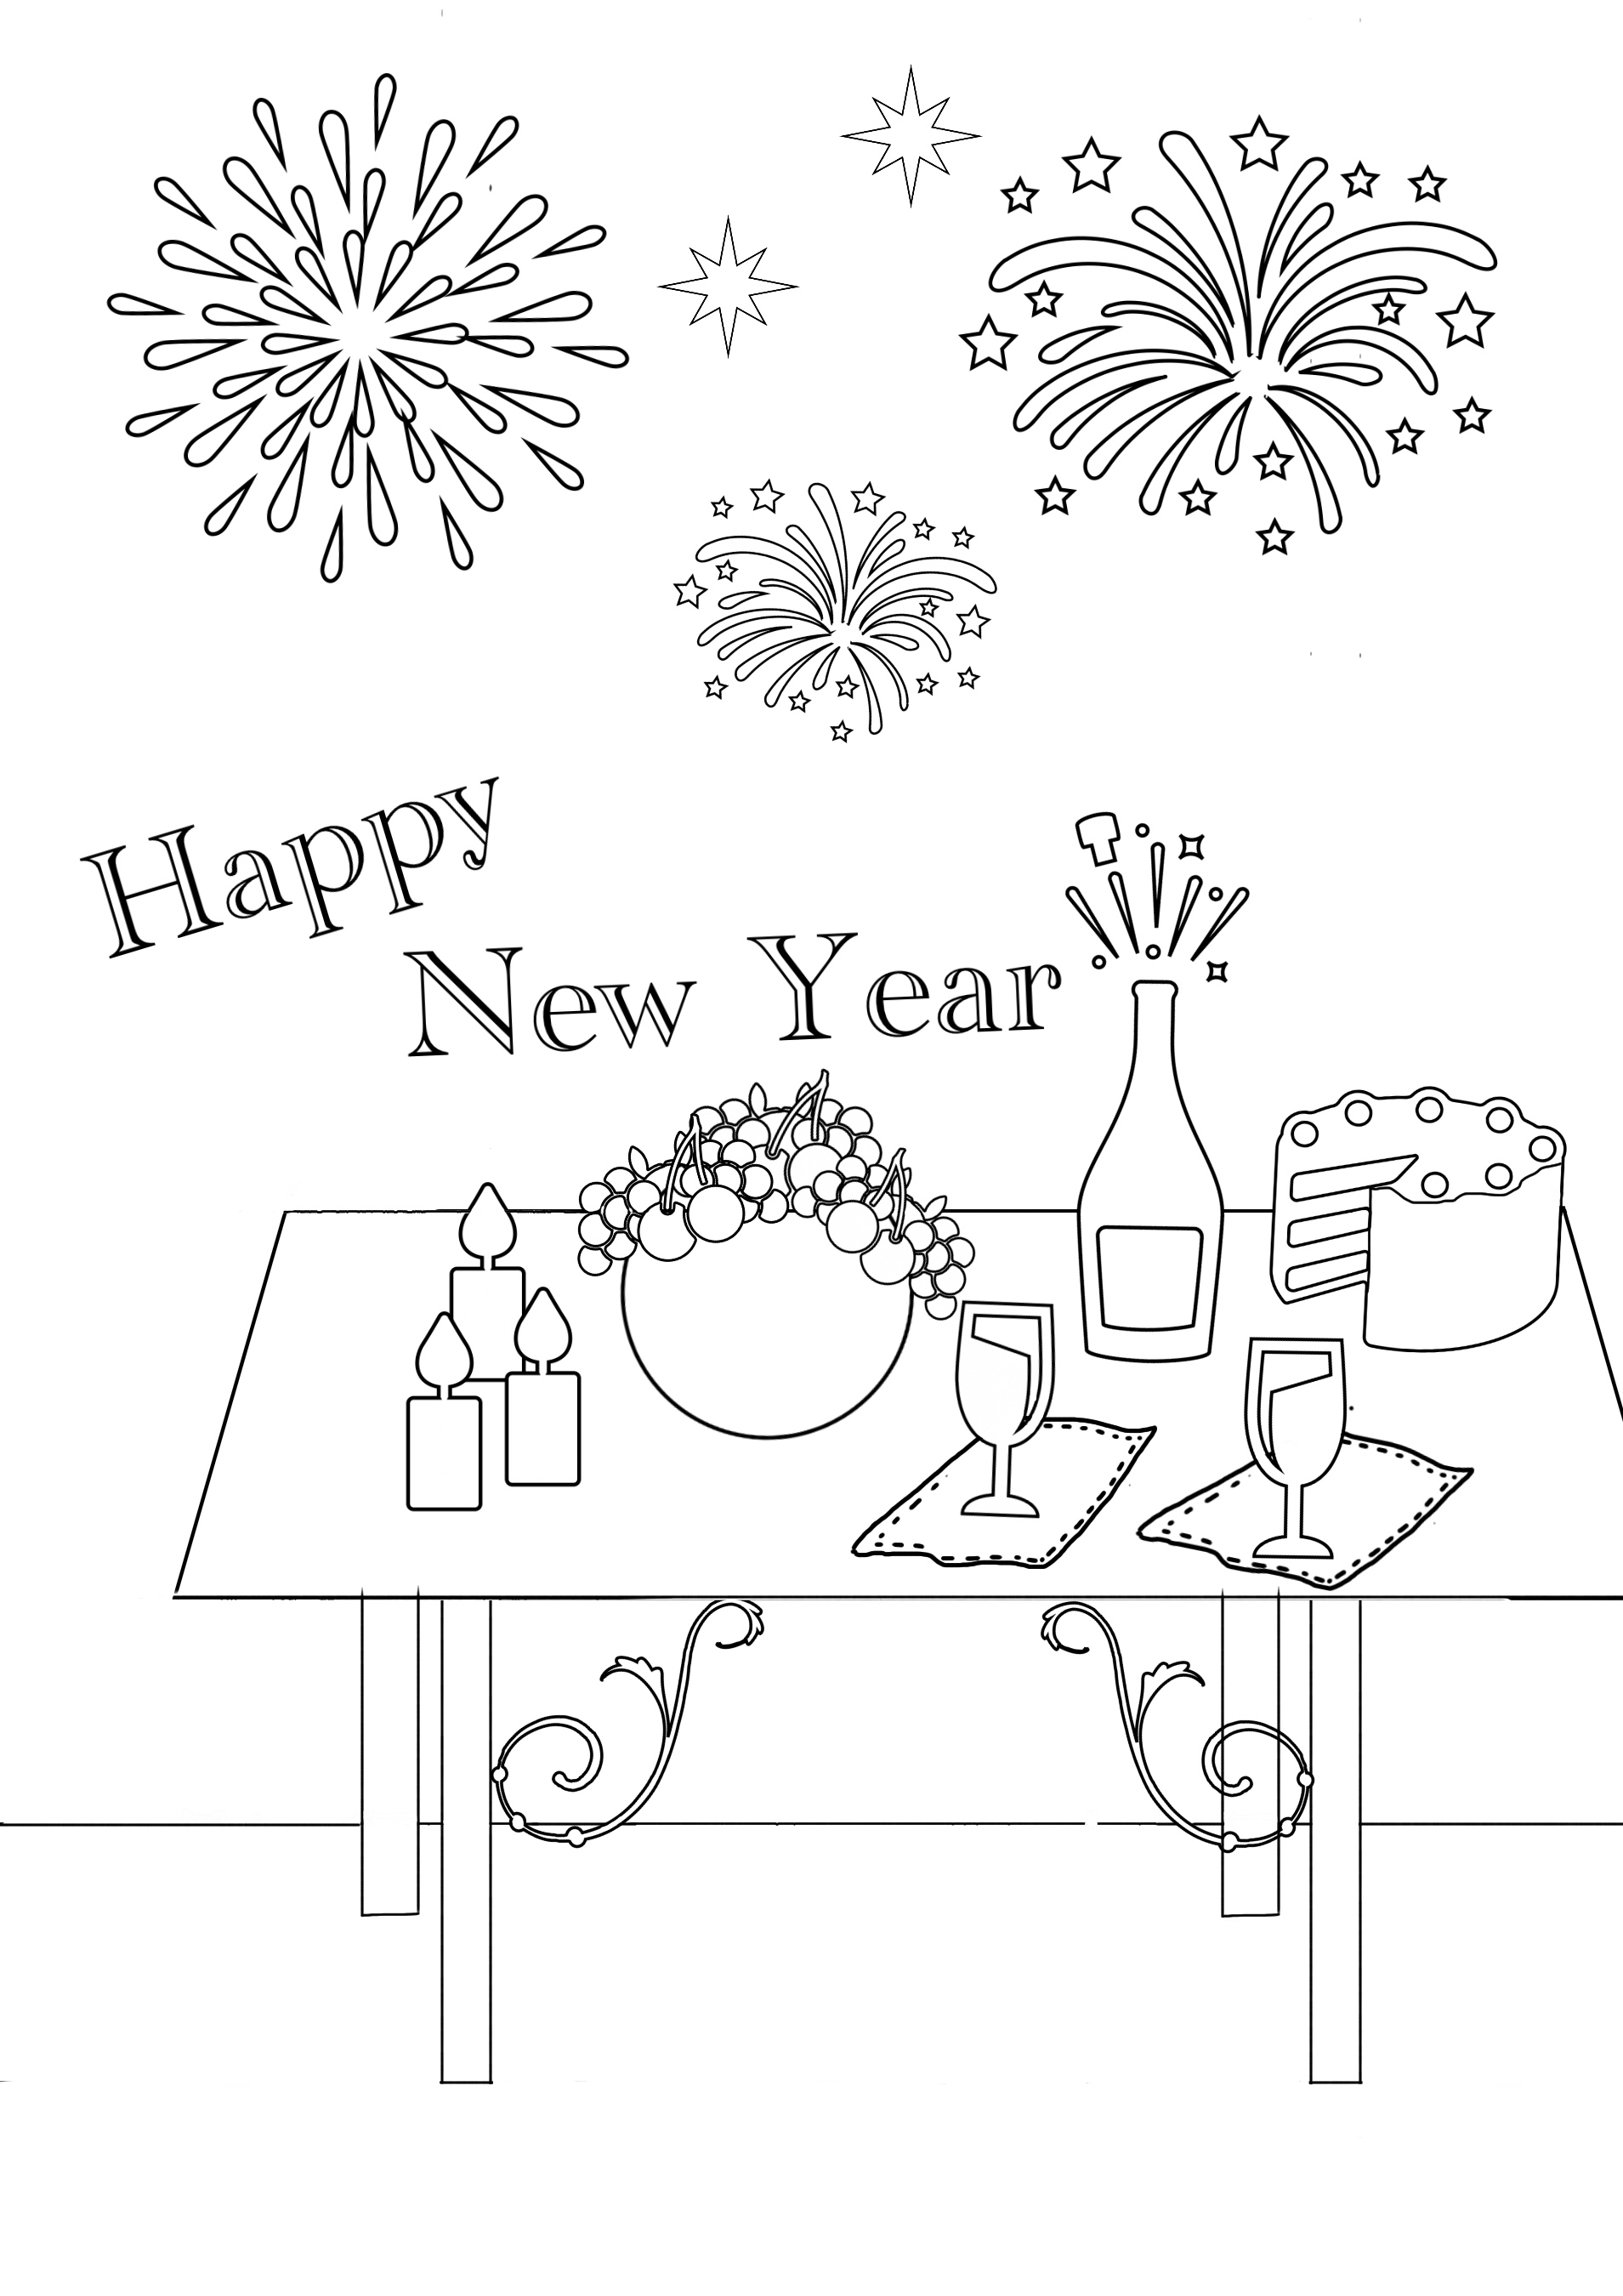 Celebrate the New Year Coloring Page